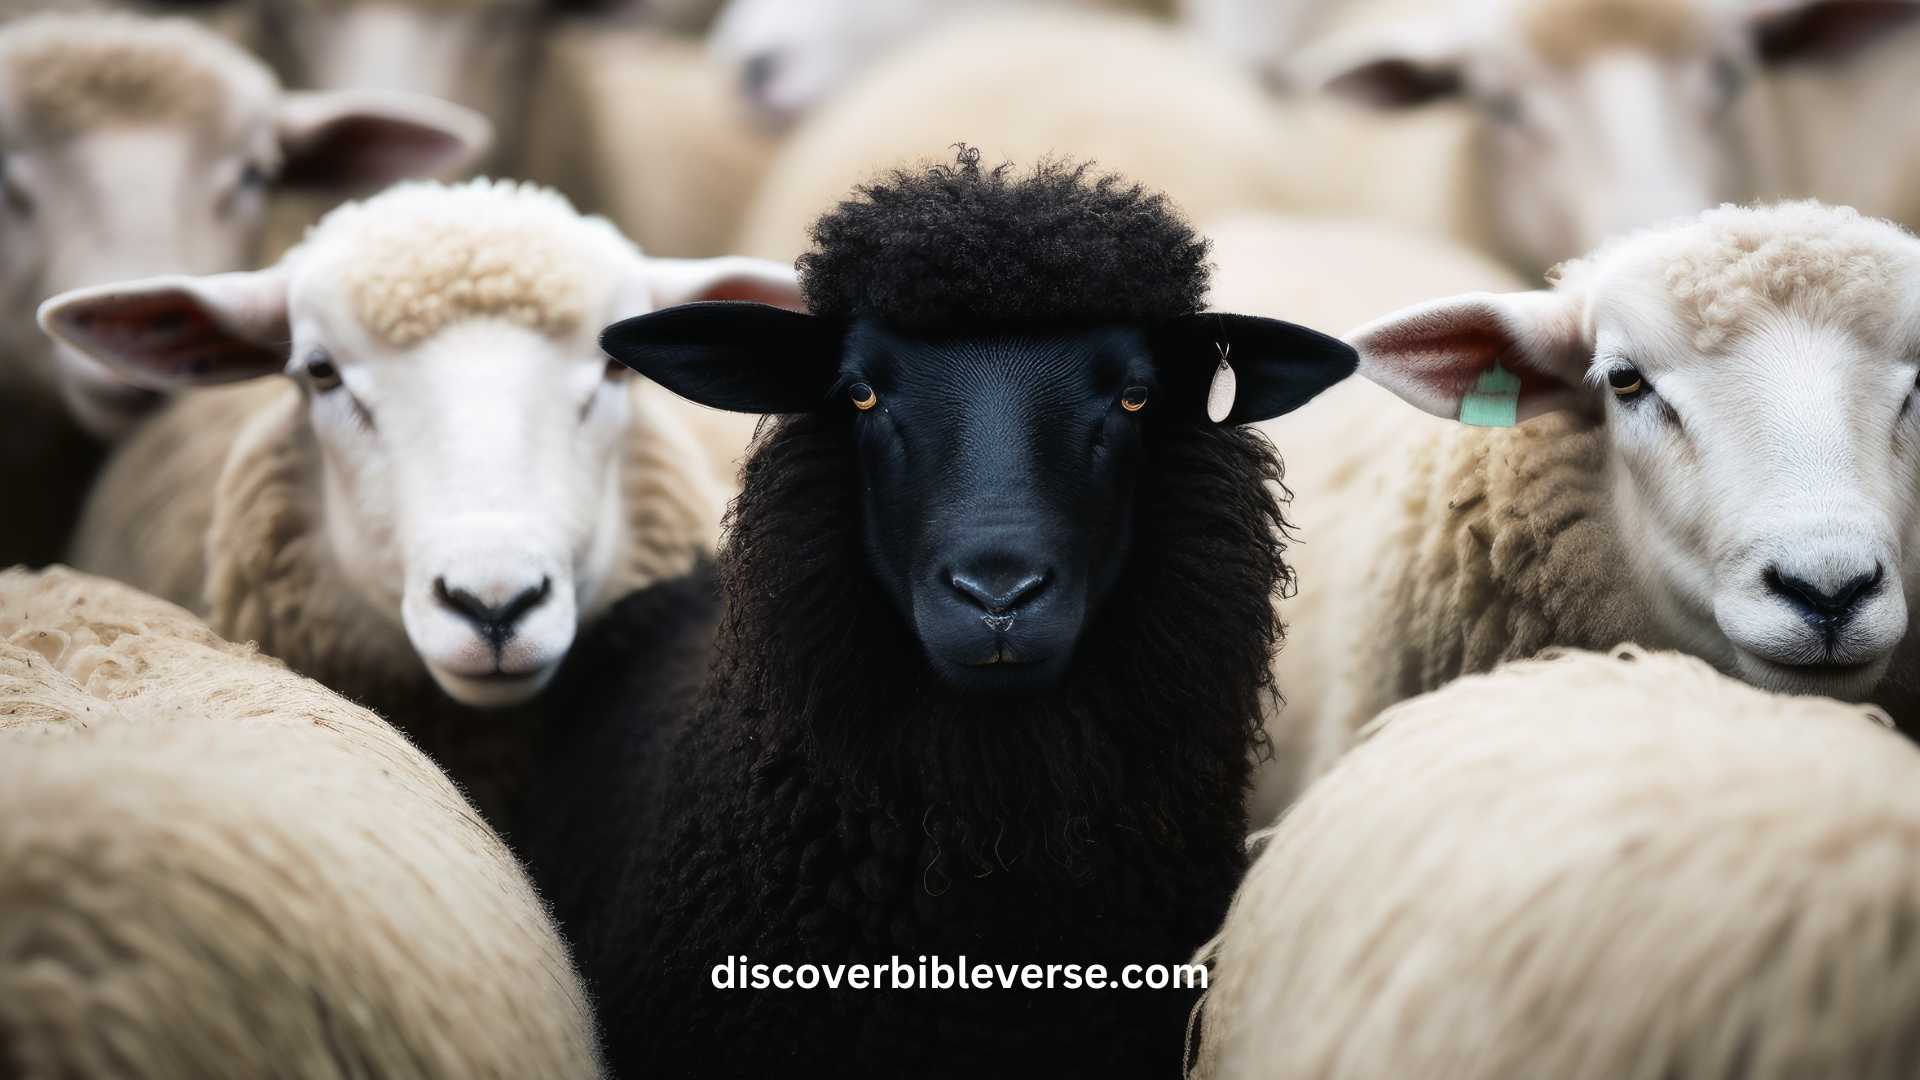 What Does “Black Sheep” Mean in the Bible and in Irish Culture?